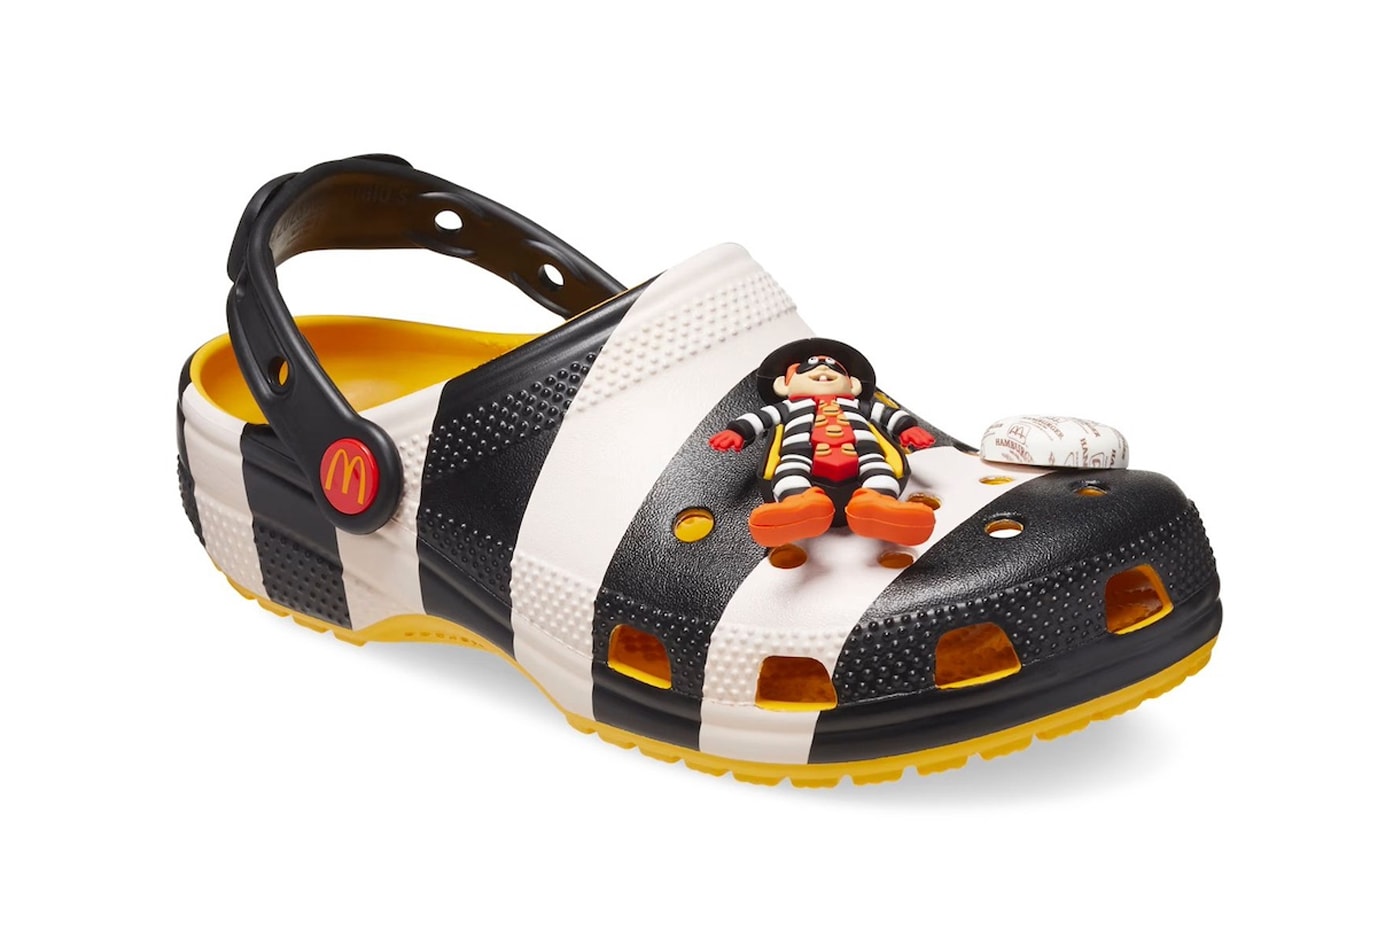 McDonald's x Crocs Collection Is Dropping This Week classic clog Red/Yellow-White 209858-90H birdie 208696-730 hamburglar Black/White-Yellow 209393-066 cozzzy sandal grimace purple black 209392-510 